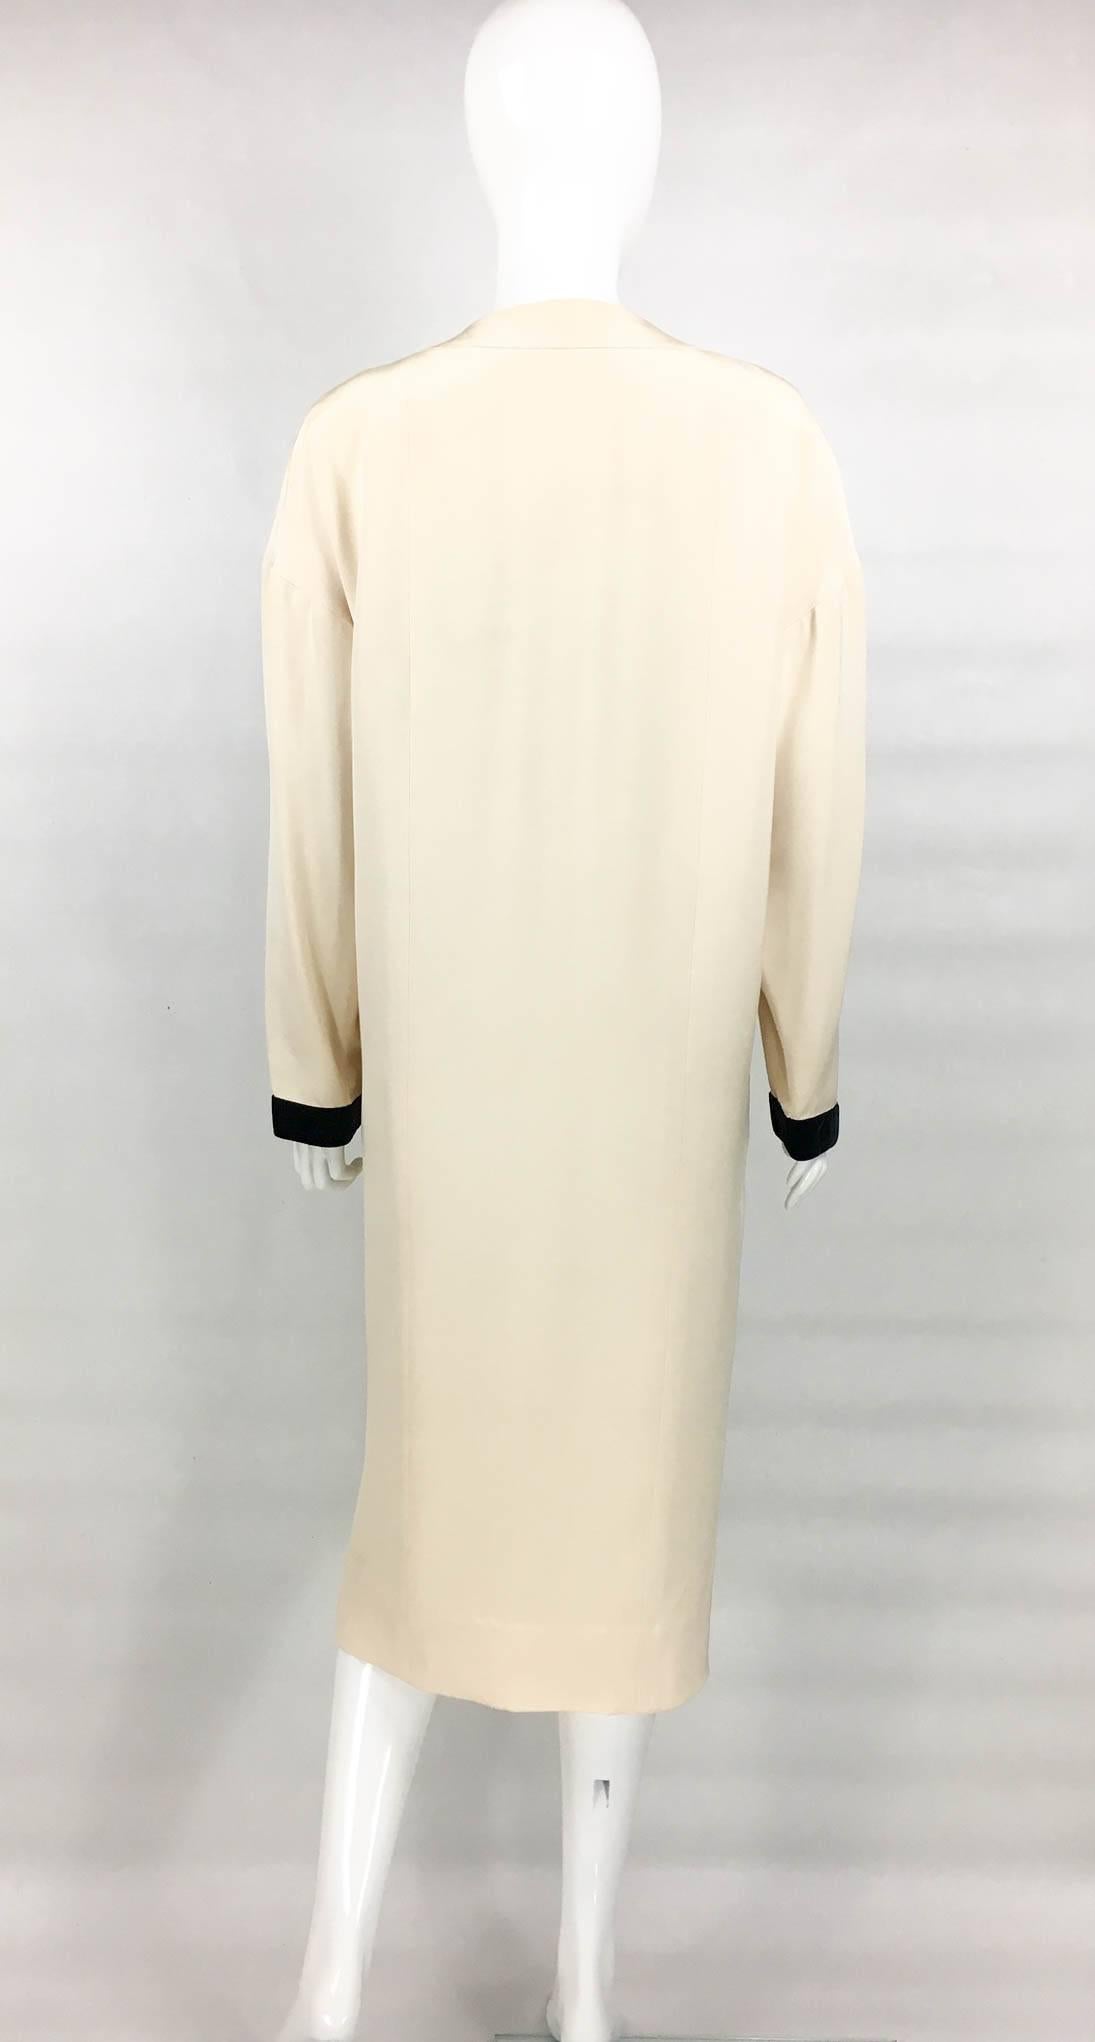 Chanel Champagne Silk Dress With Black Velvet Cuffs and Bow - 1980s For Sale 2